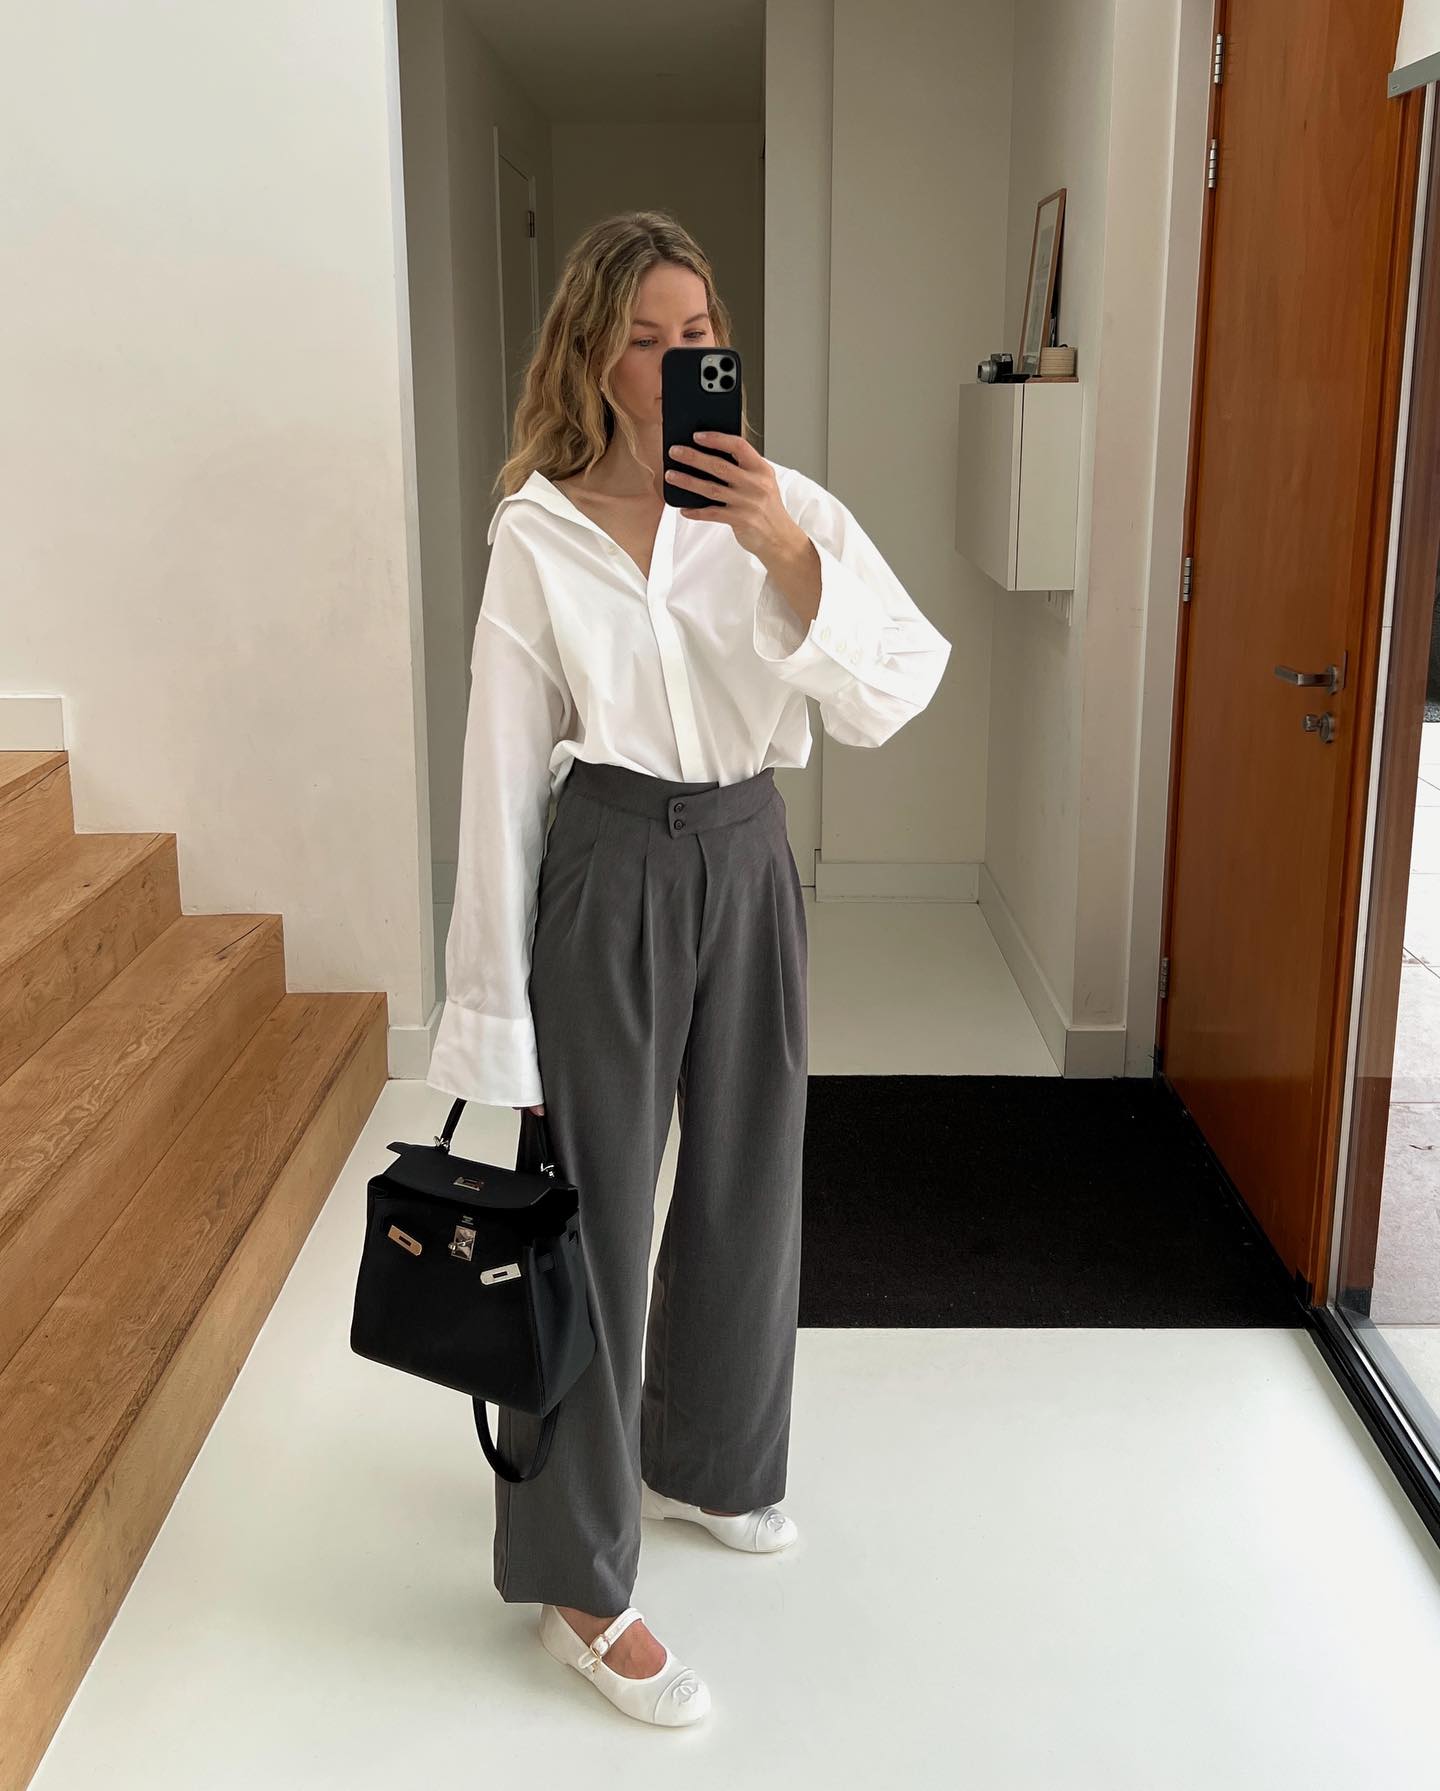 White shirt outfits: @anoukyve wears a white shirt and grey trousers